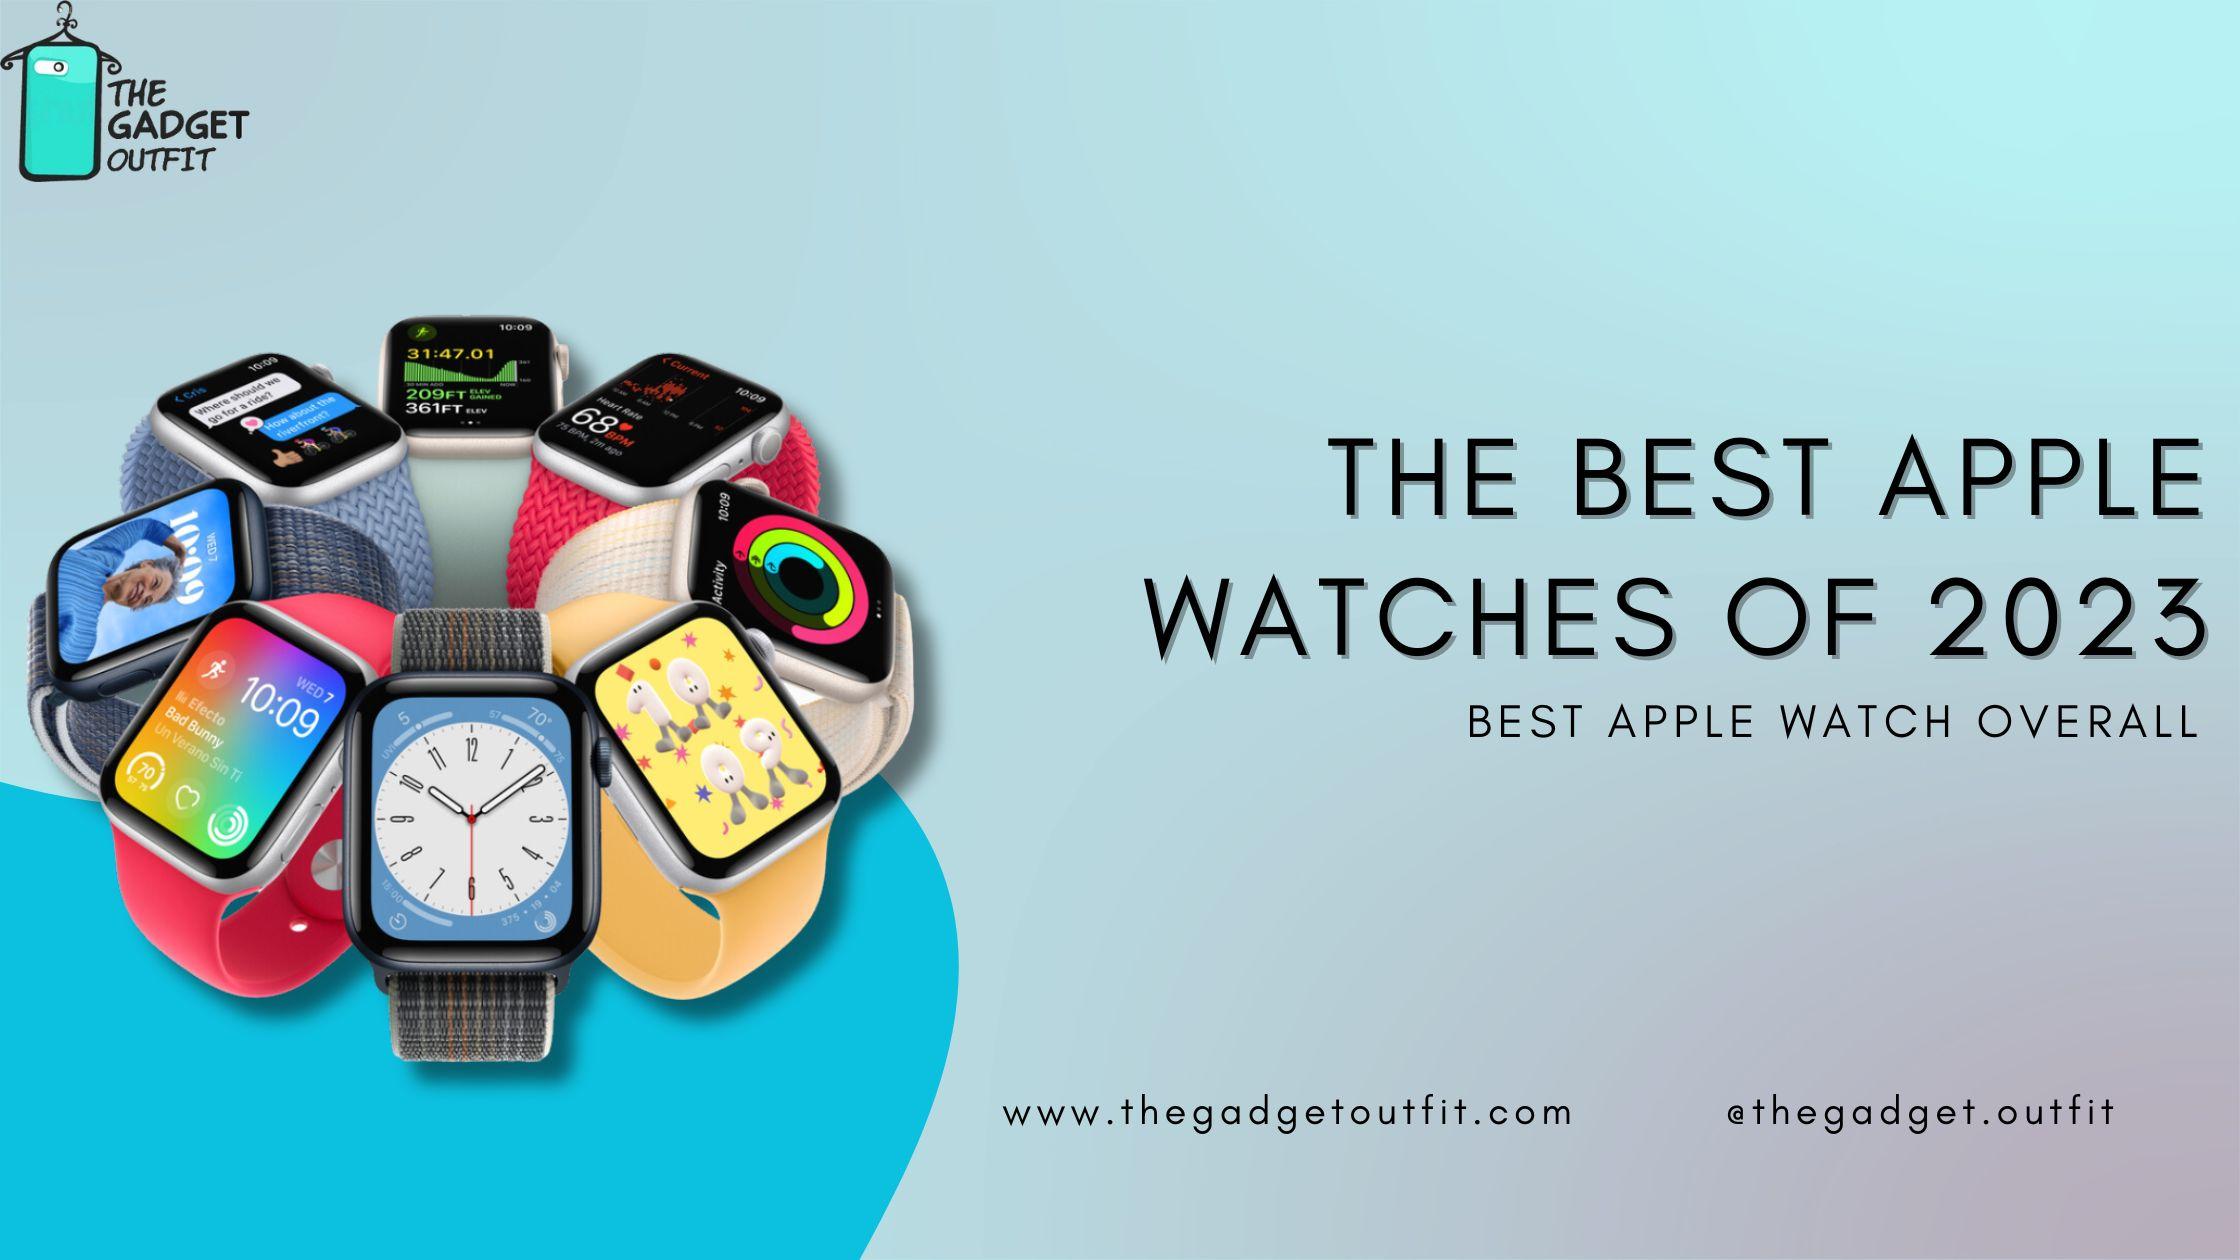 The best Apple Watches of 2023